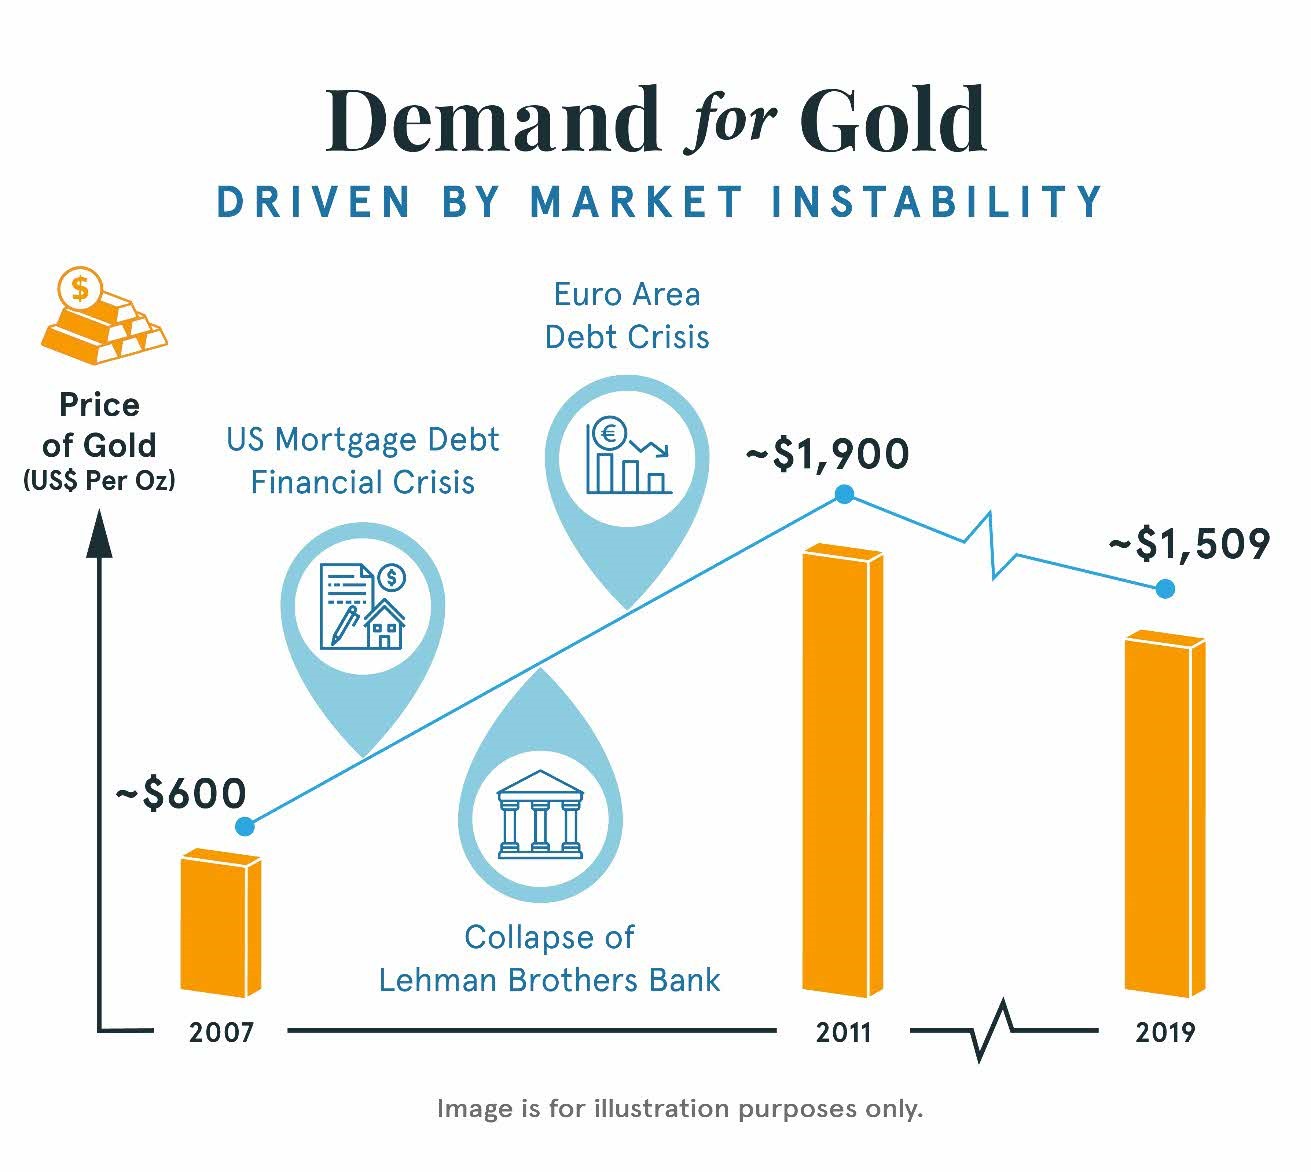 Demand for gold